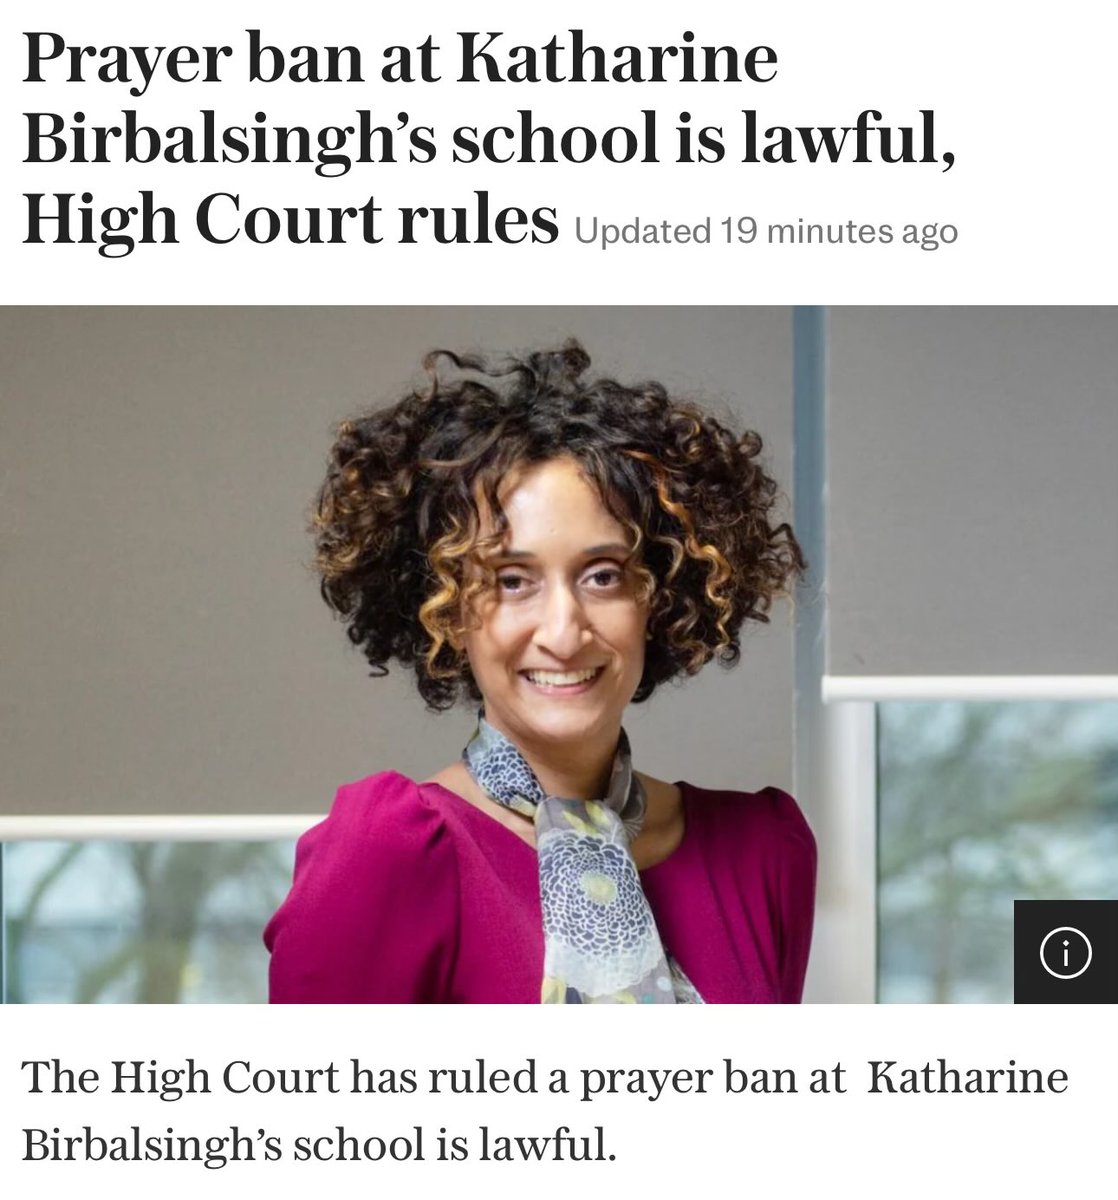 Katharine Birbalsingh’s Michaela School prayer ban is lawful, says the High Court. Birbalsingh introduced the prayer ban in March last year “against a backdrop of events including violence, intimidation and appalling racial harassment of our teachers”. A muslim pupil, who cannot